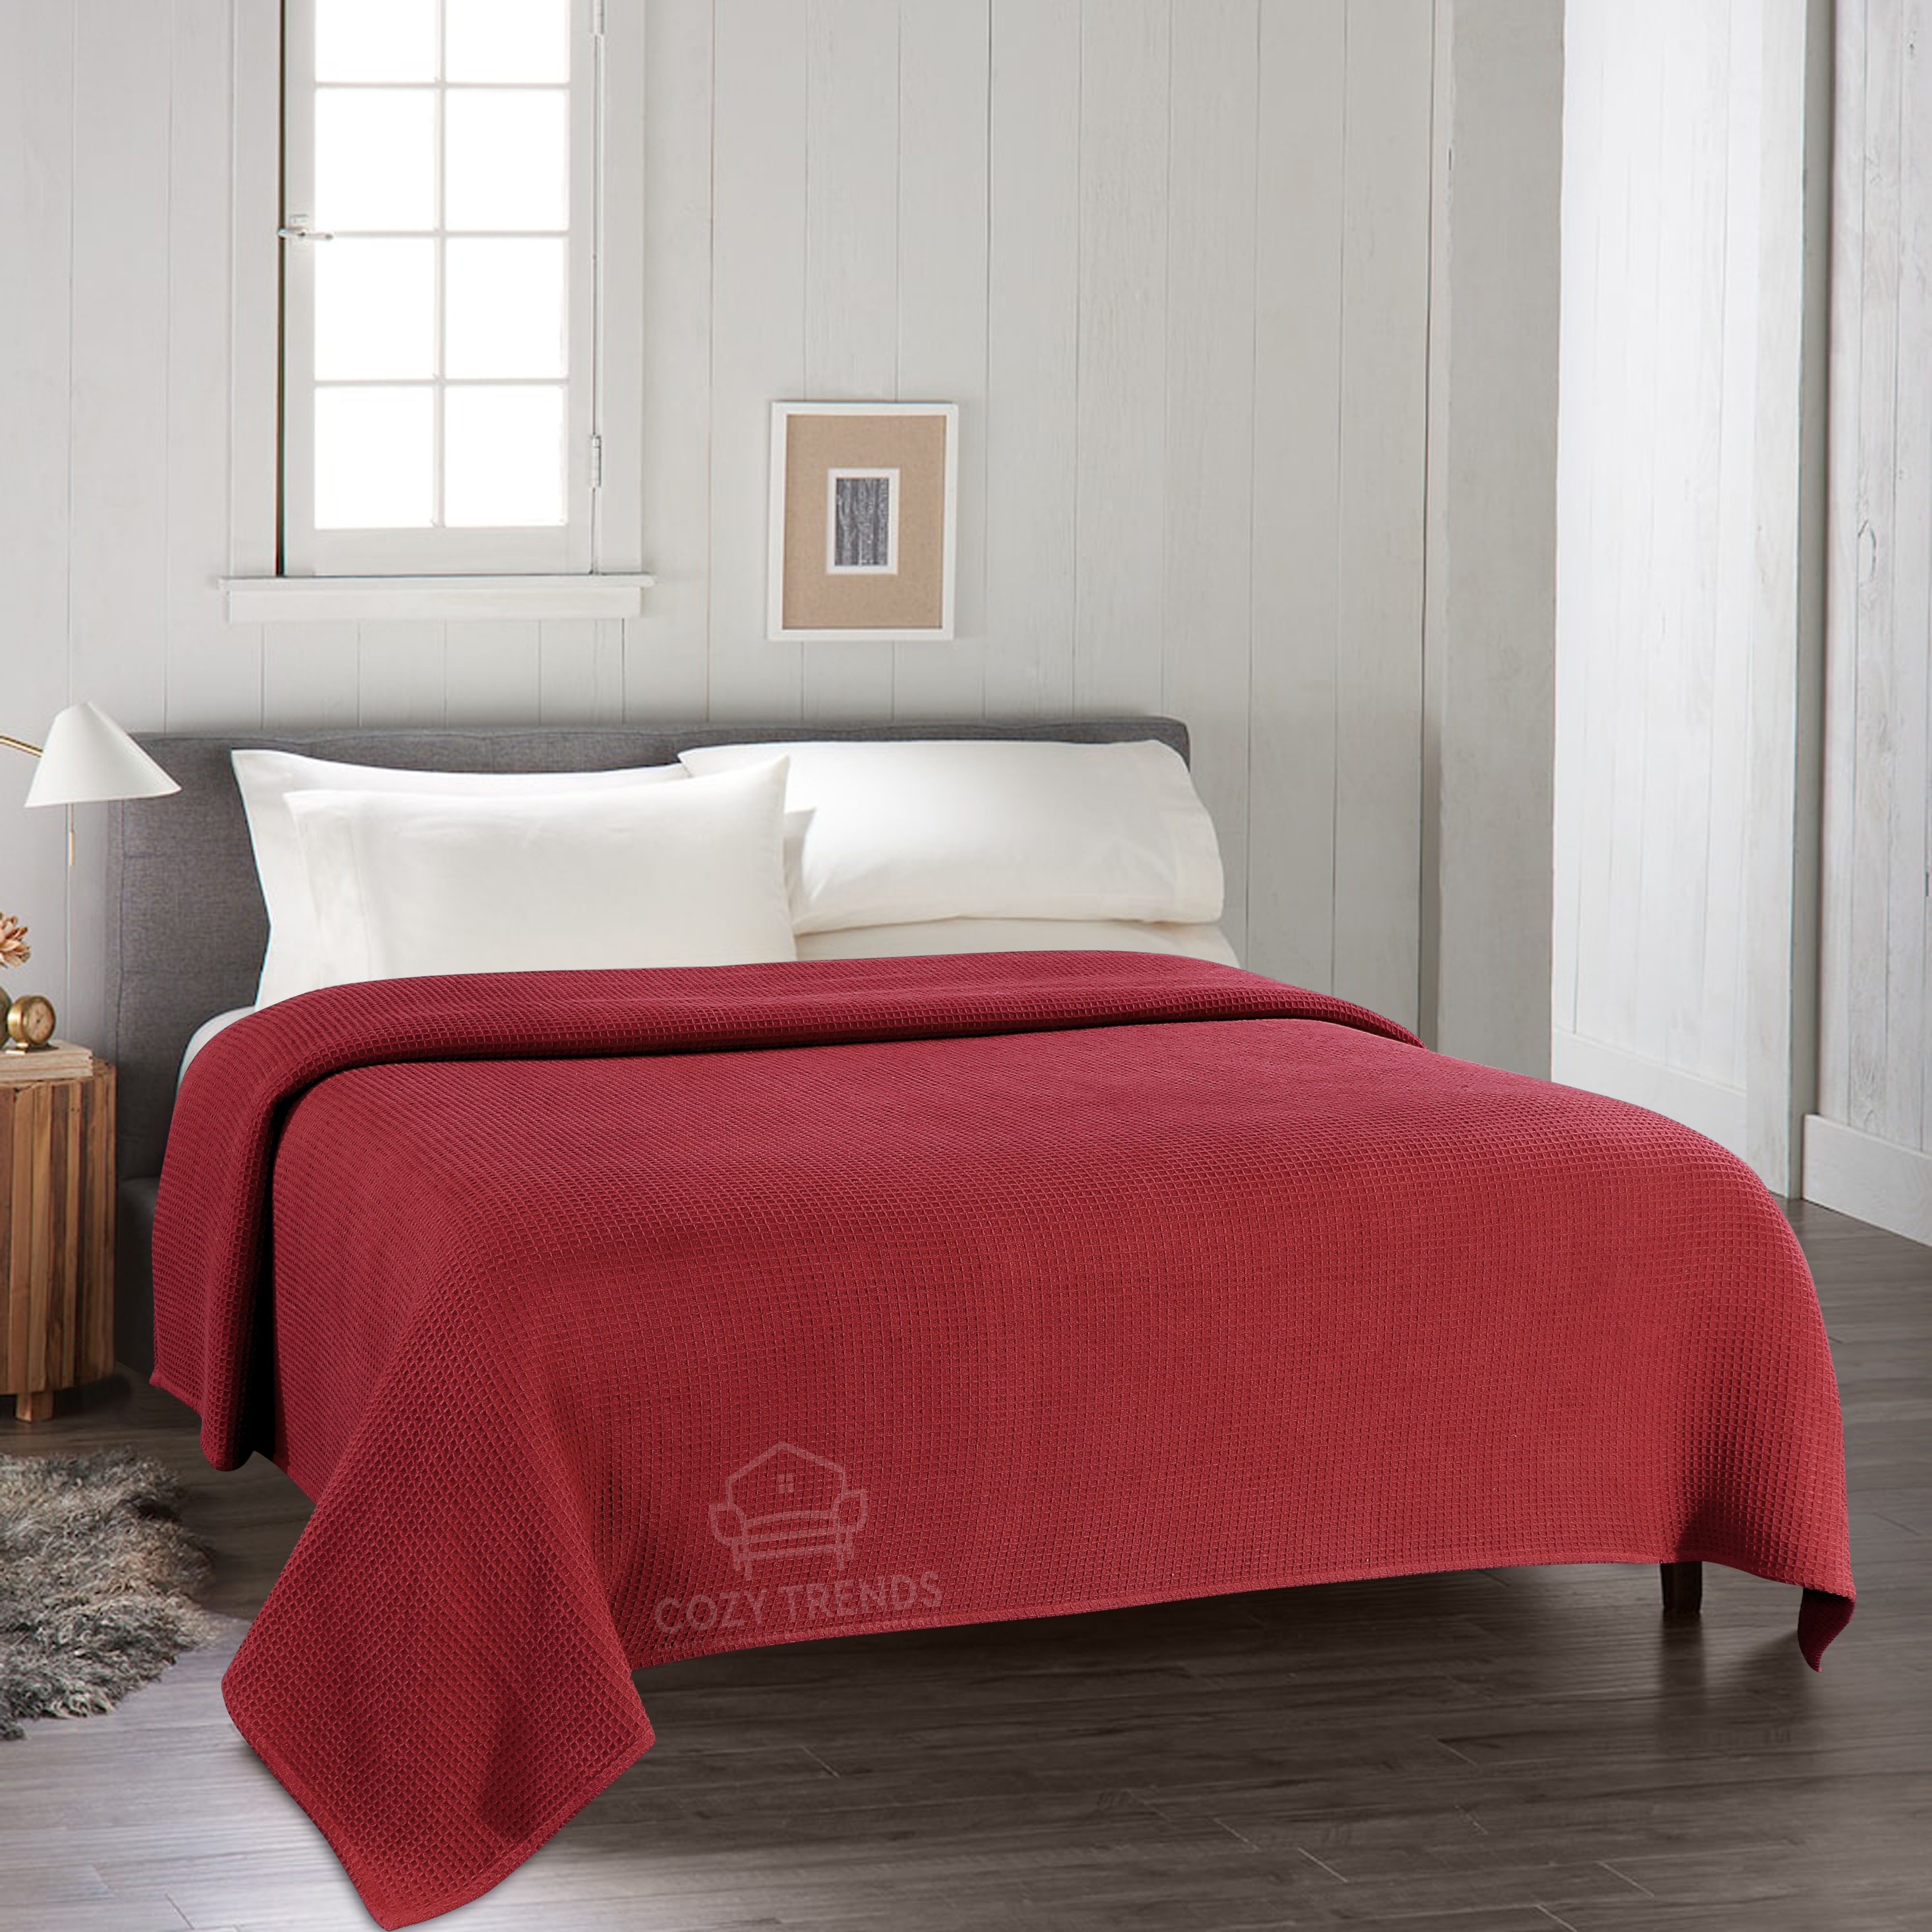 100-percent Cotton Waffle Weave Medium Weight All Season Thermal Blankets -  On Sale - Bed Bath & Beyond - 32461939